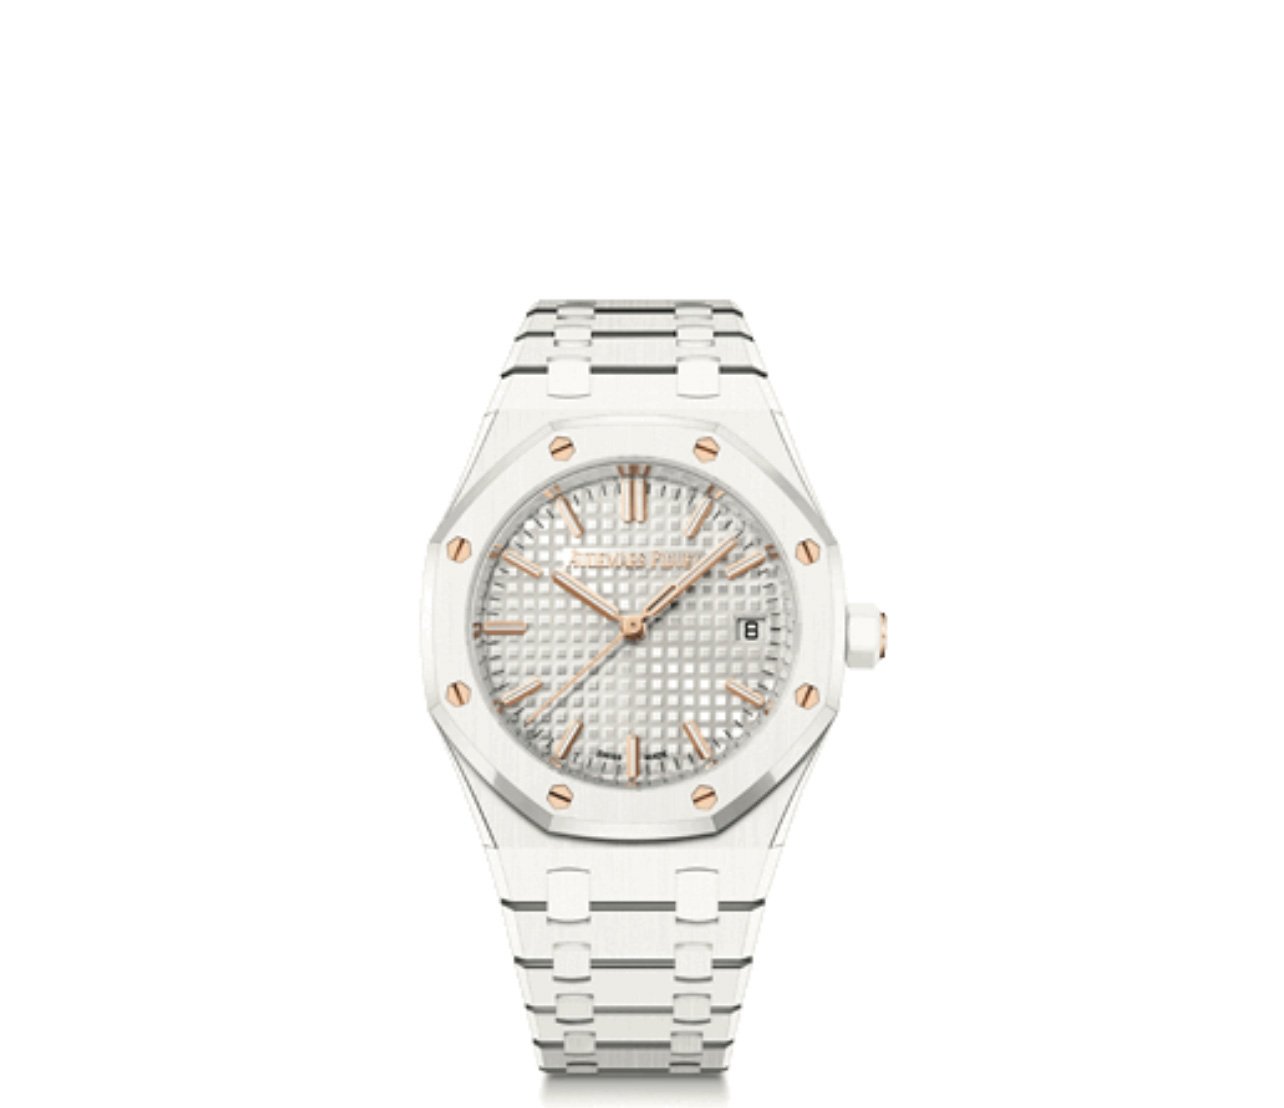 White ceramic Audemars Piguet watch with rose gold and silver detailing